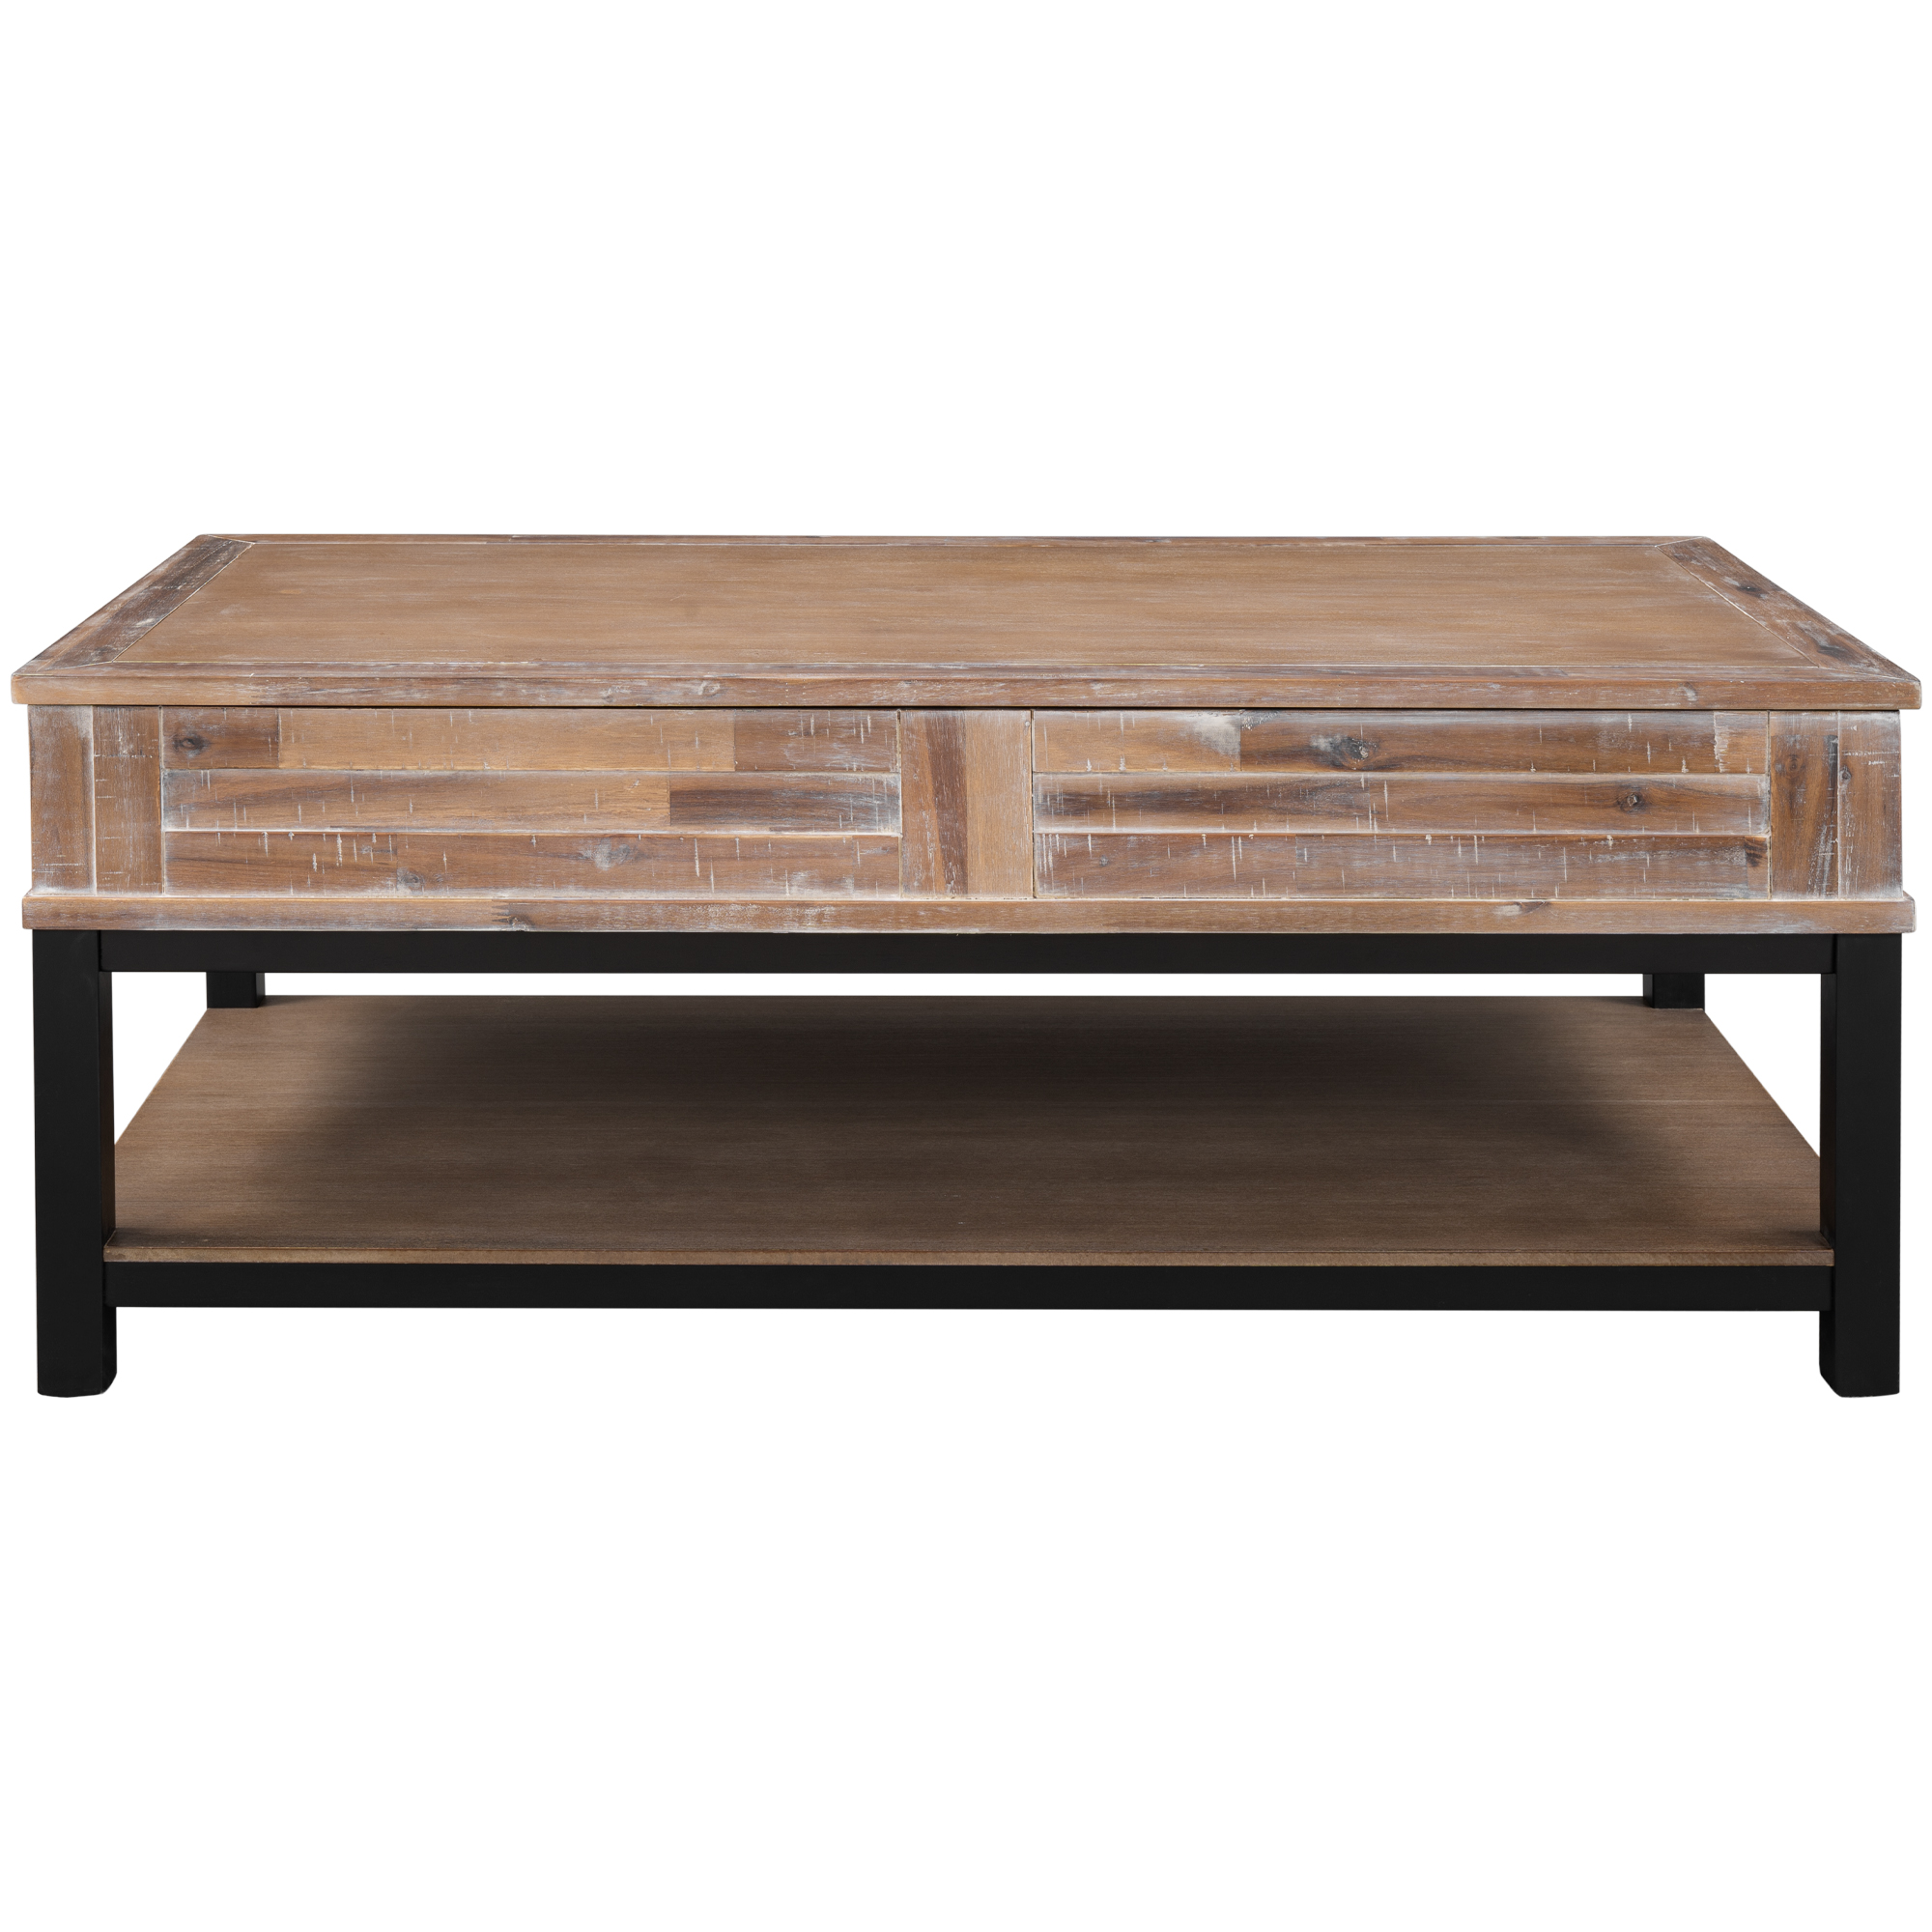 Lift Top Coffee Table with Shelf - WF298652AAN